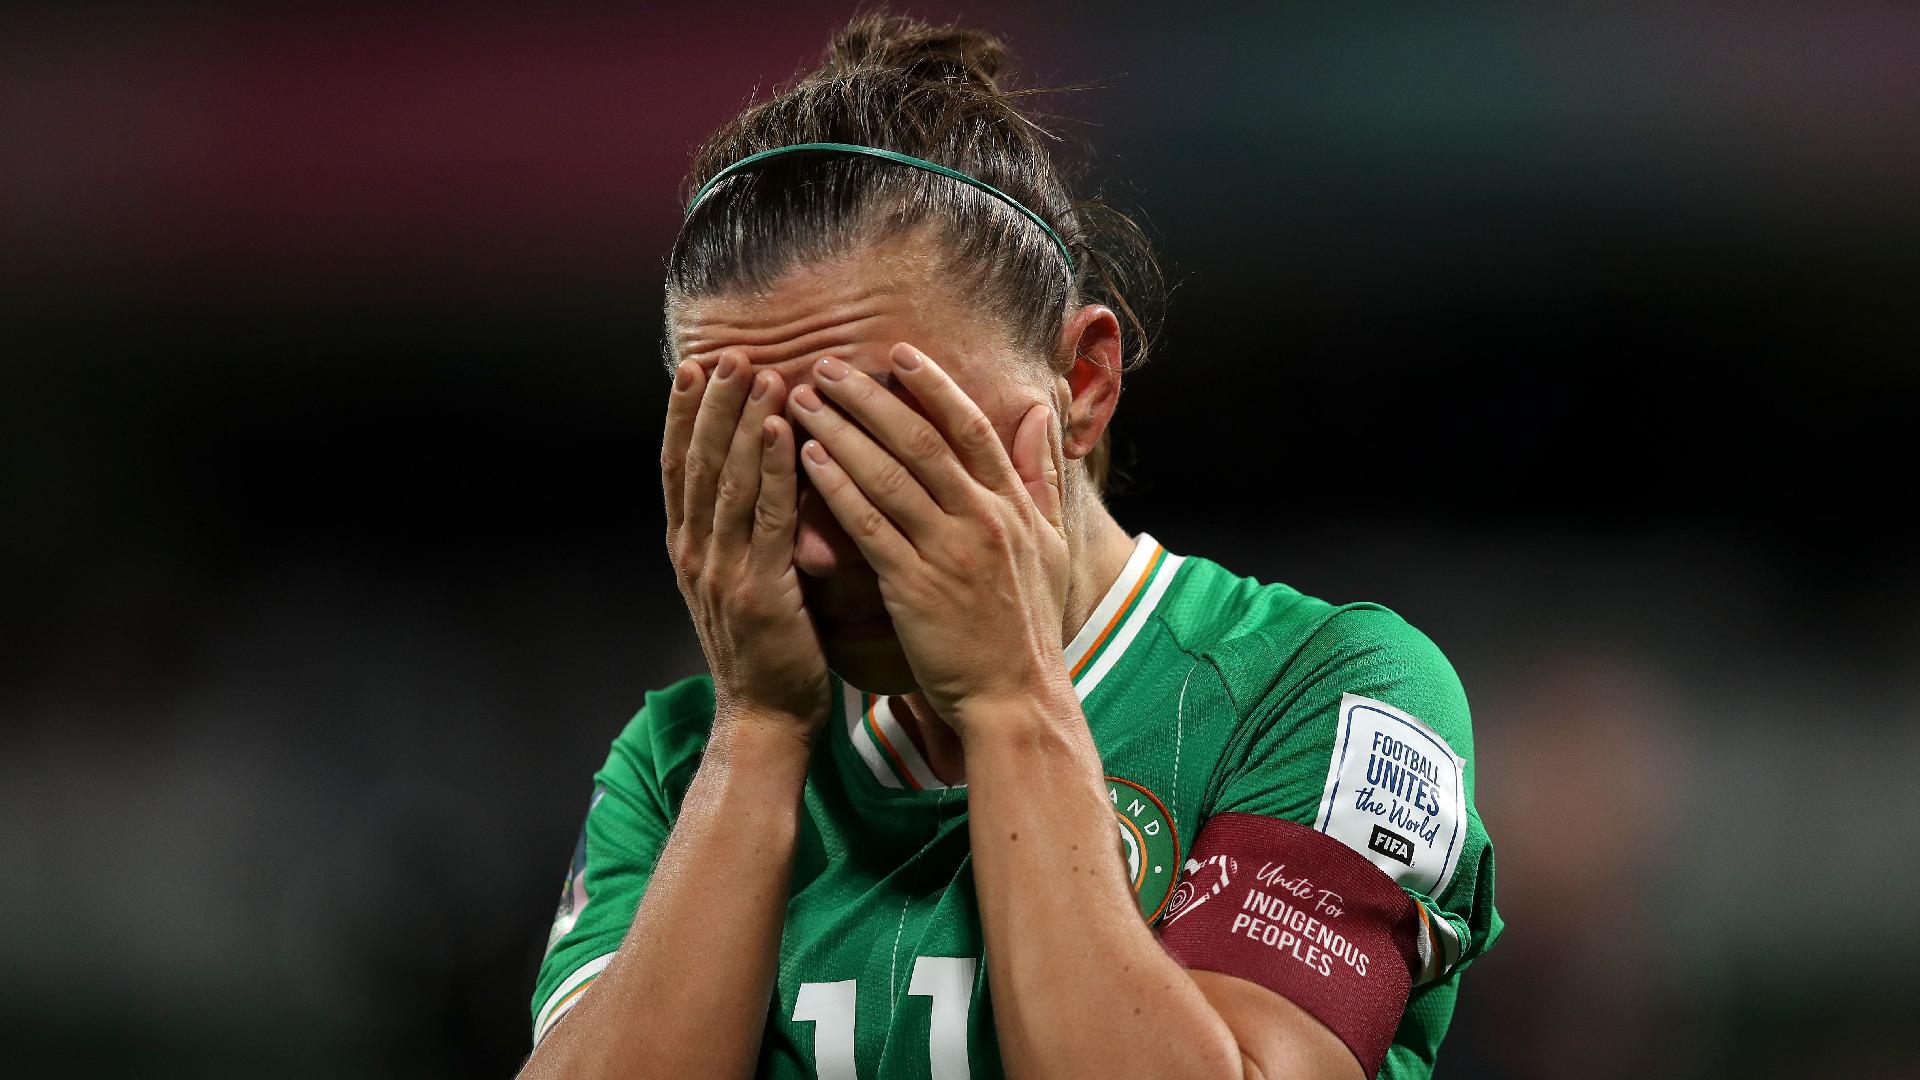 Today at the World Cup: Ireland knocked out after Canada defeat